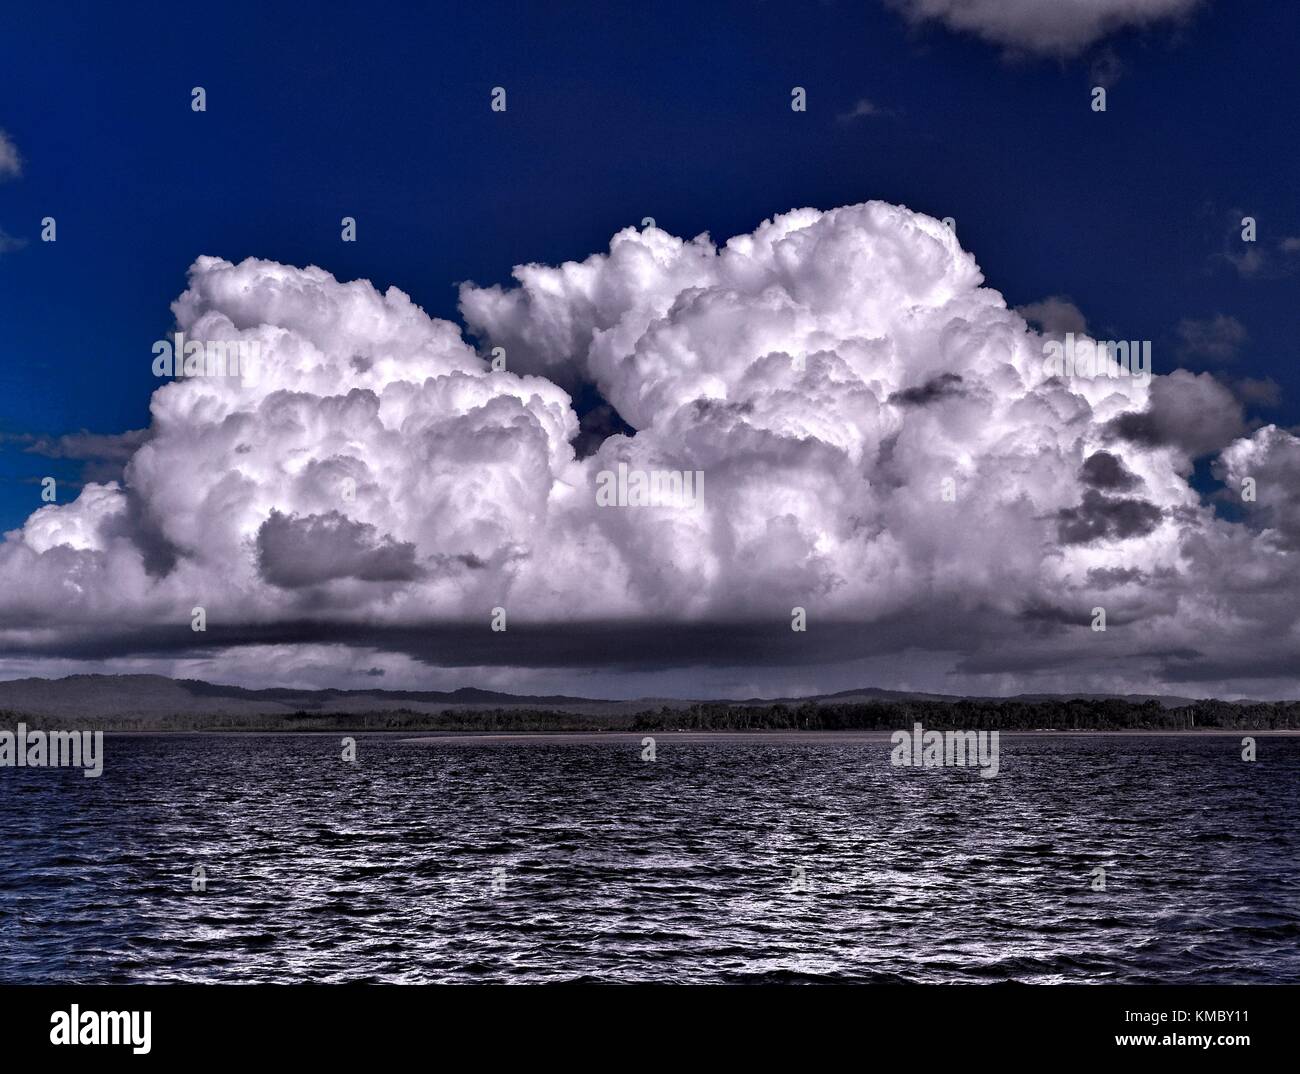 A spectacular dramatic brightly coloured cloudy sea water tropical seascape featuring awesome billowing white Cumulus cloud formation in a  blue sky Stock Photo